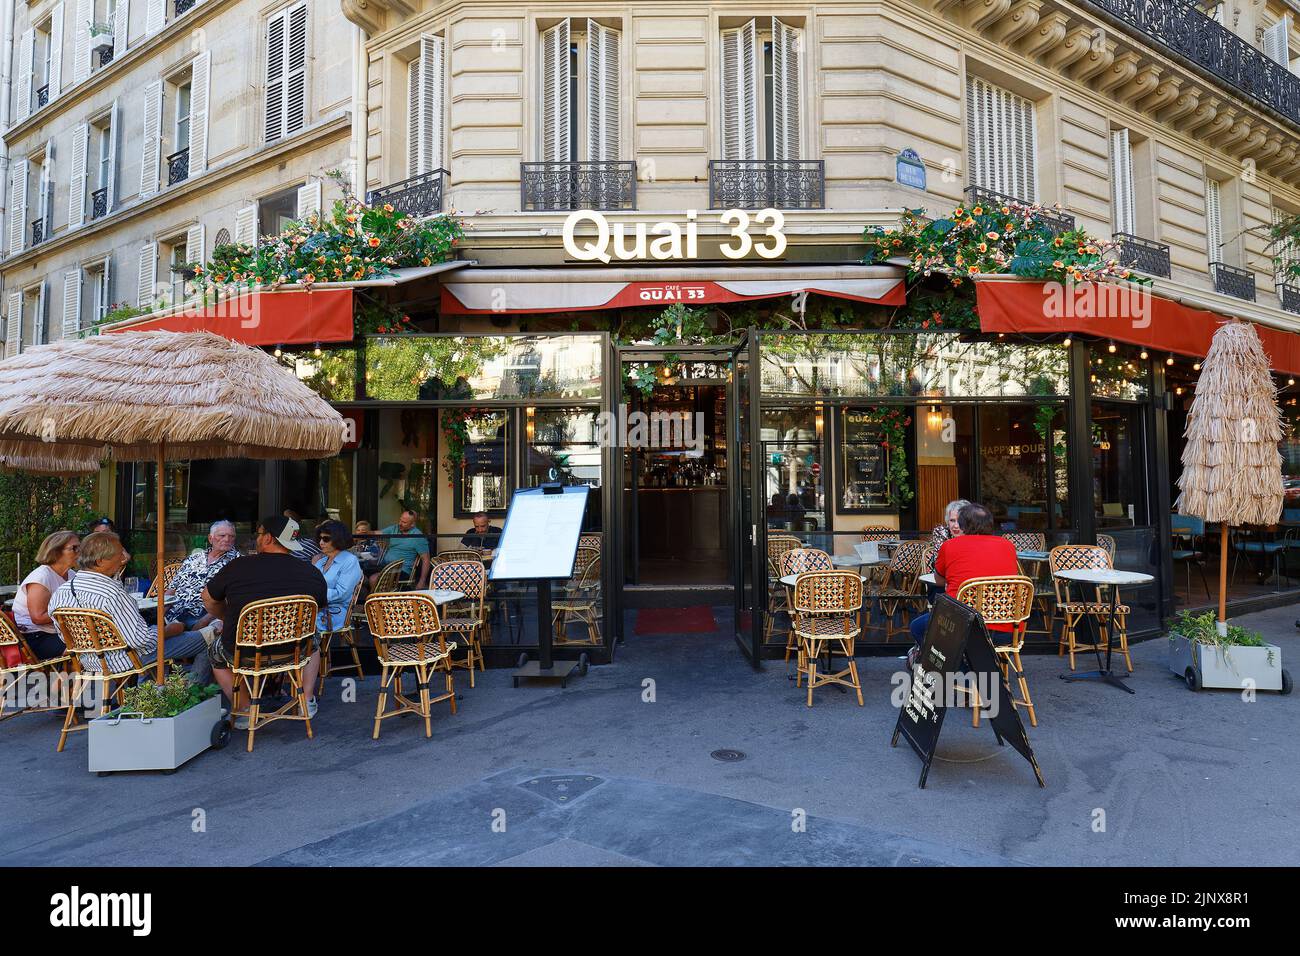 Paris, France - August 13, 2022 : The traditional French cafe Quai 33 located between Gare de Lyon railway station and famous Bastille square in 12th Stock Photo